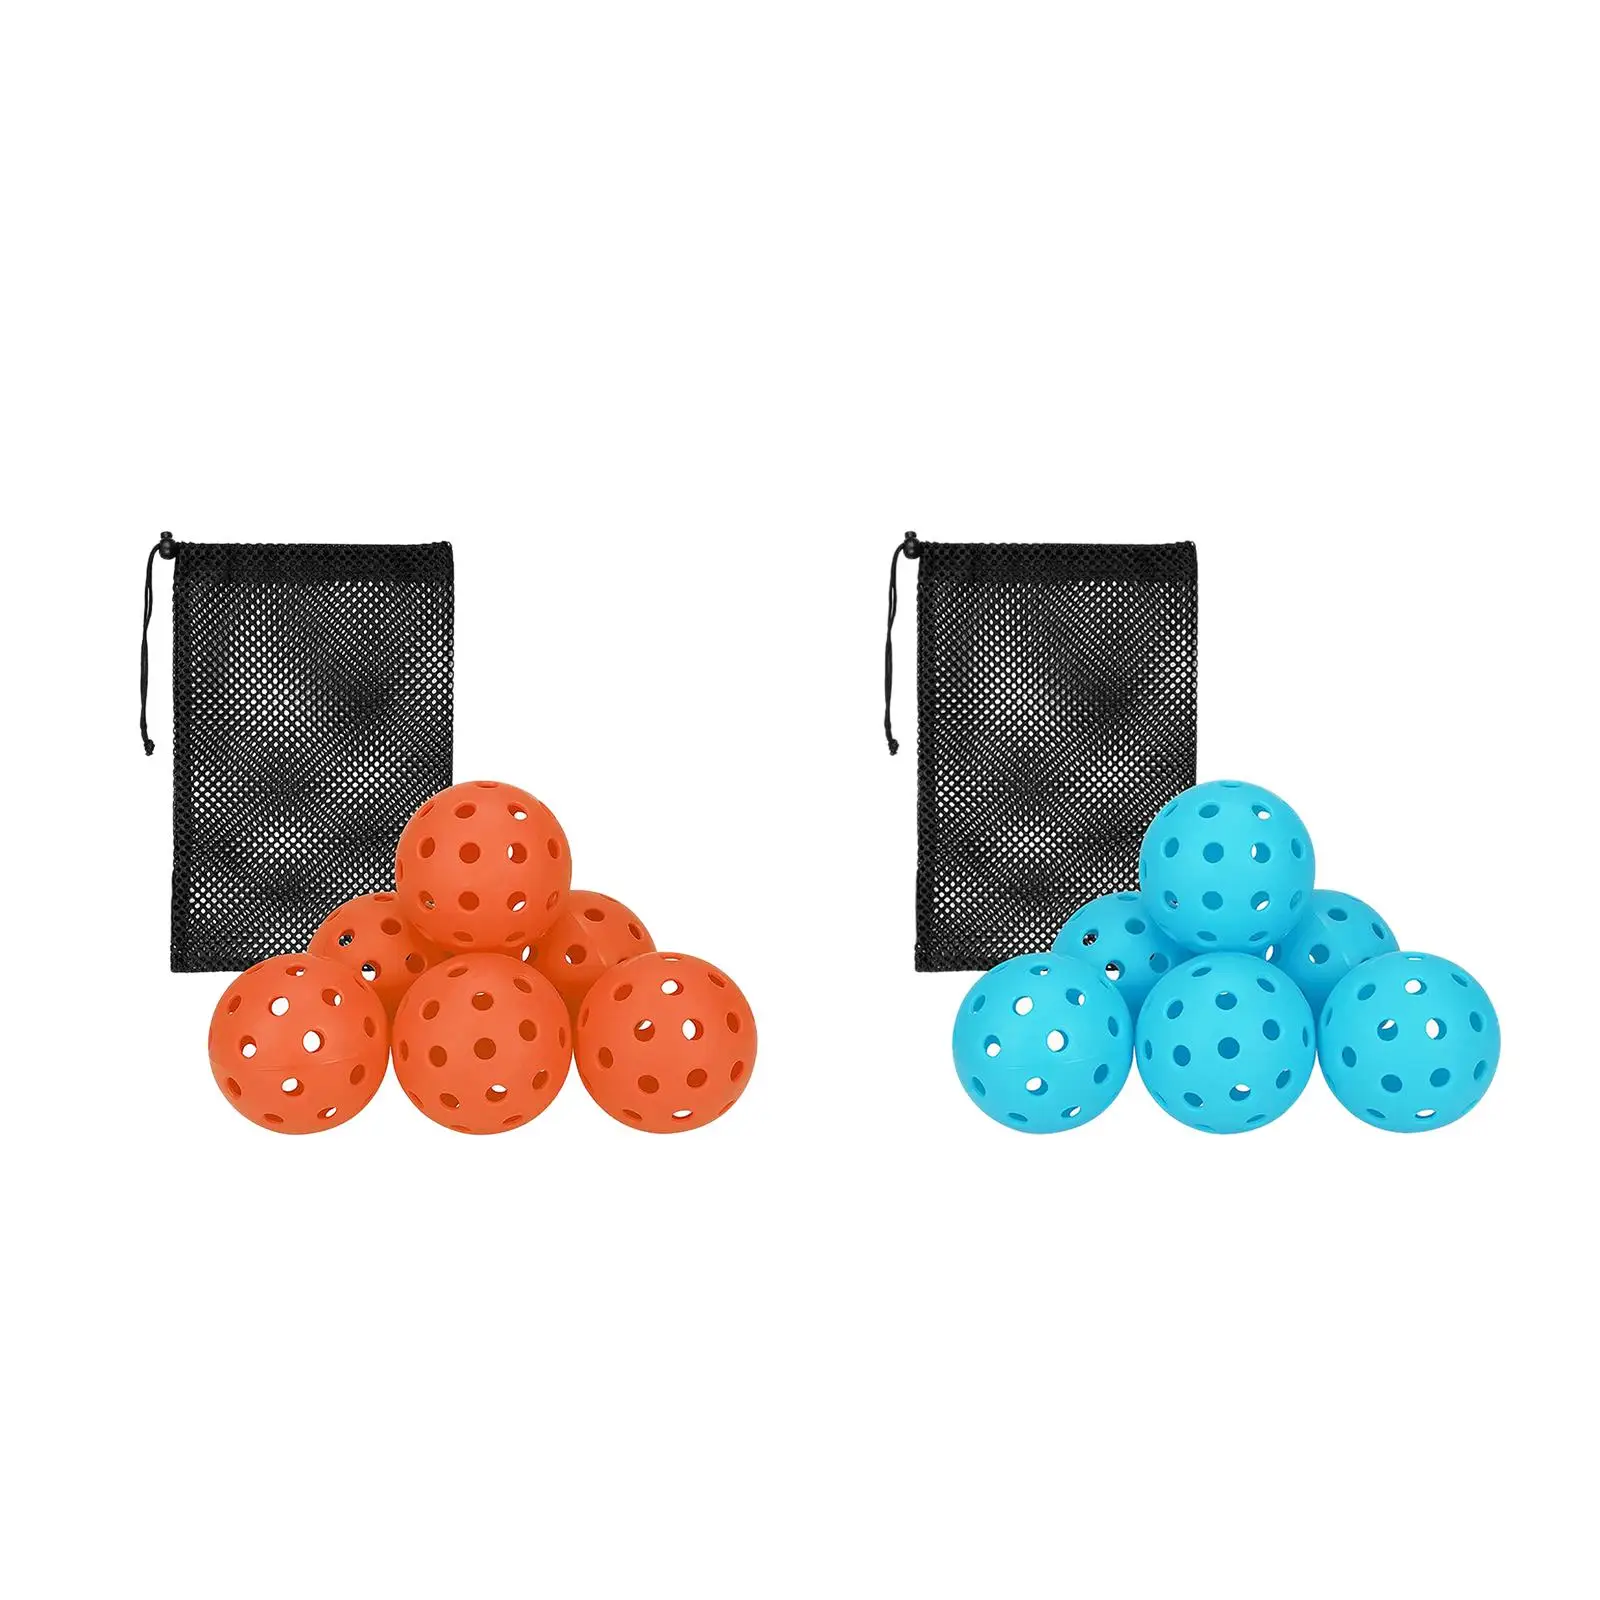 6x Pickleball Balls Professional Pickle Balls for Training Practice Outdoor